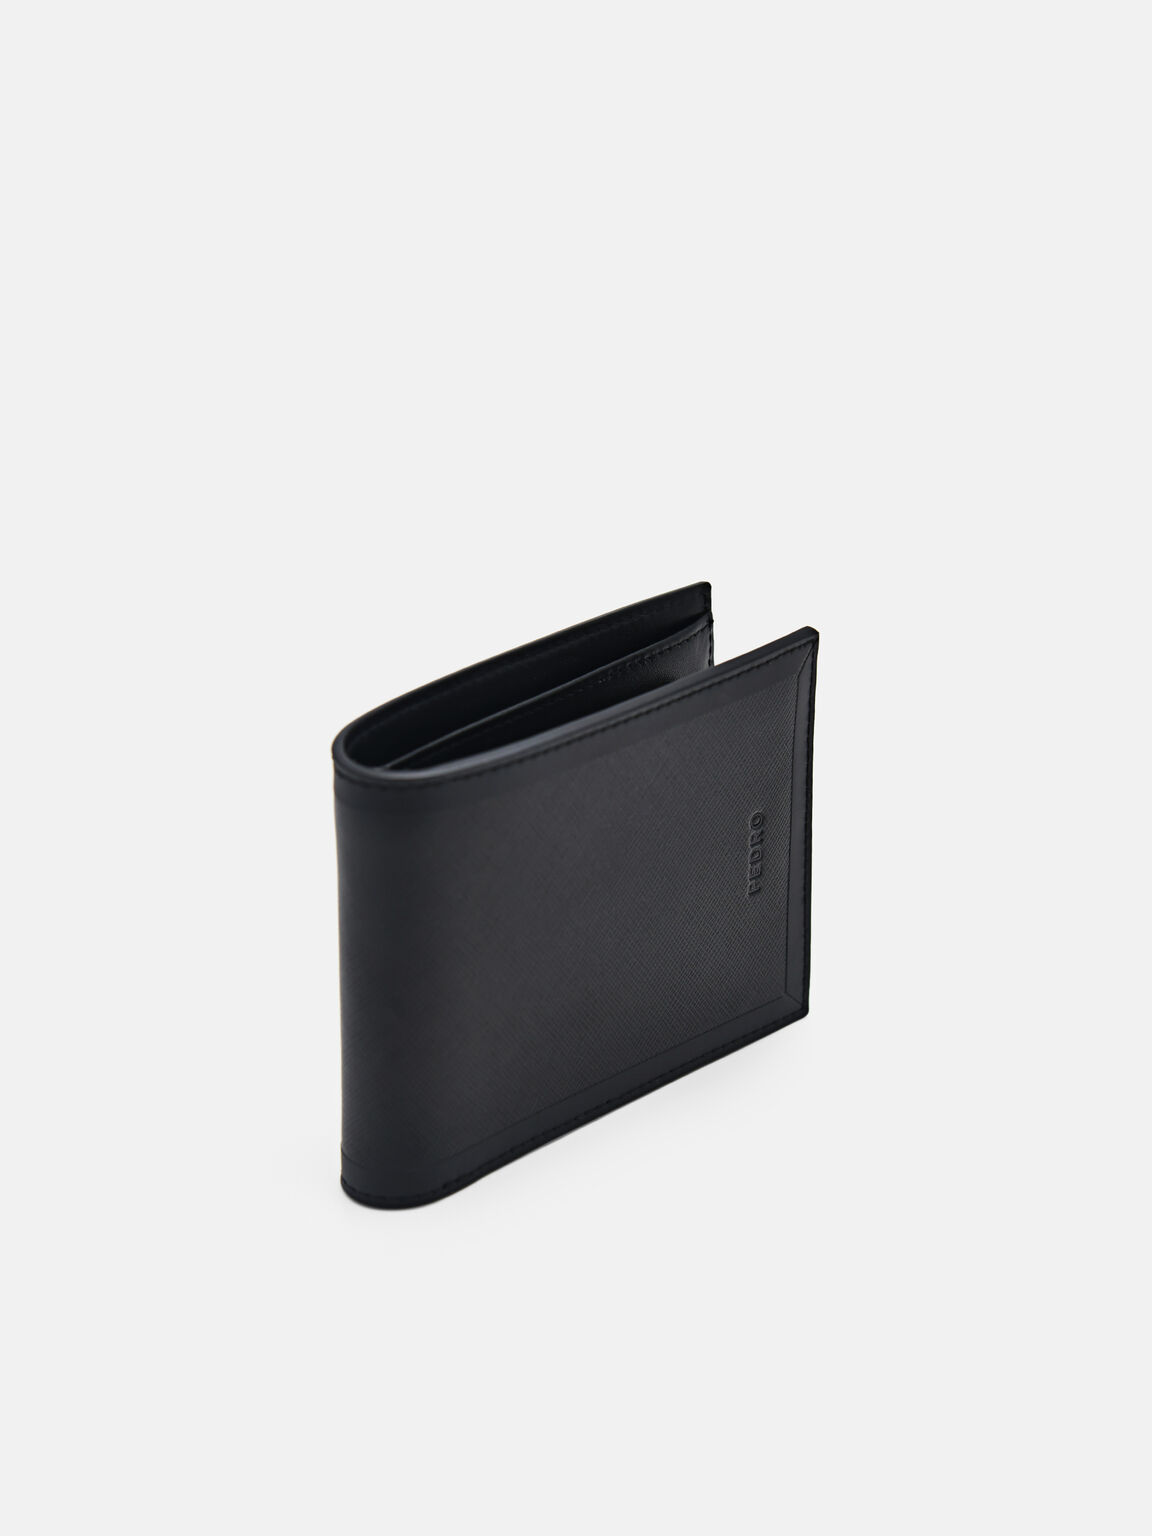 Leather Bi-Fold Wallet with Insert, Black